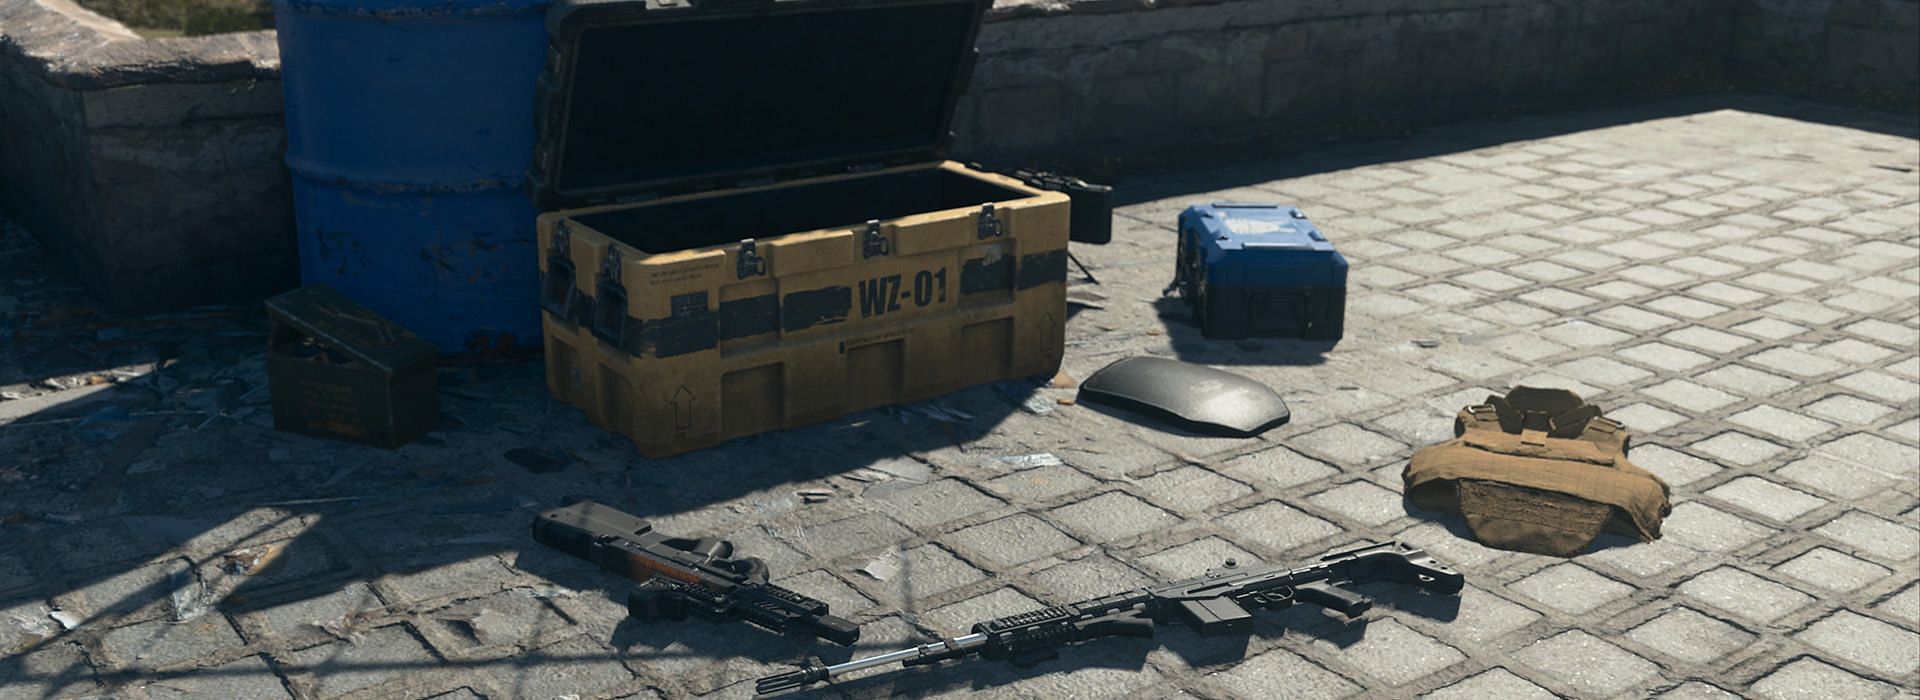 New lootbox in Warzone 2 (Image via Activision)